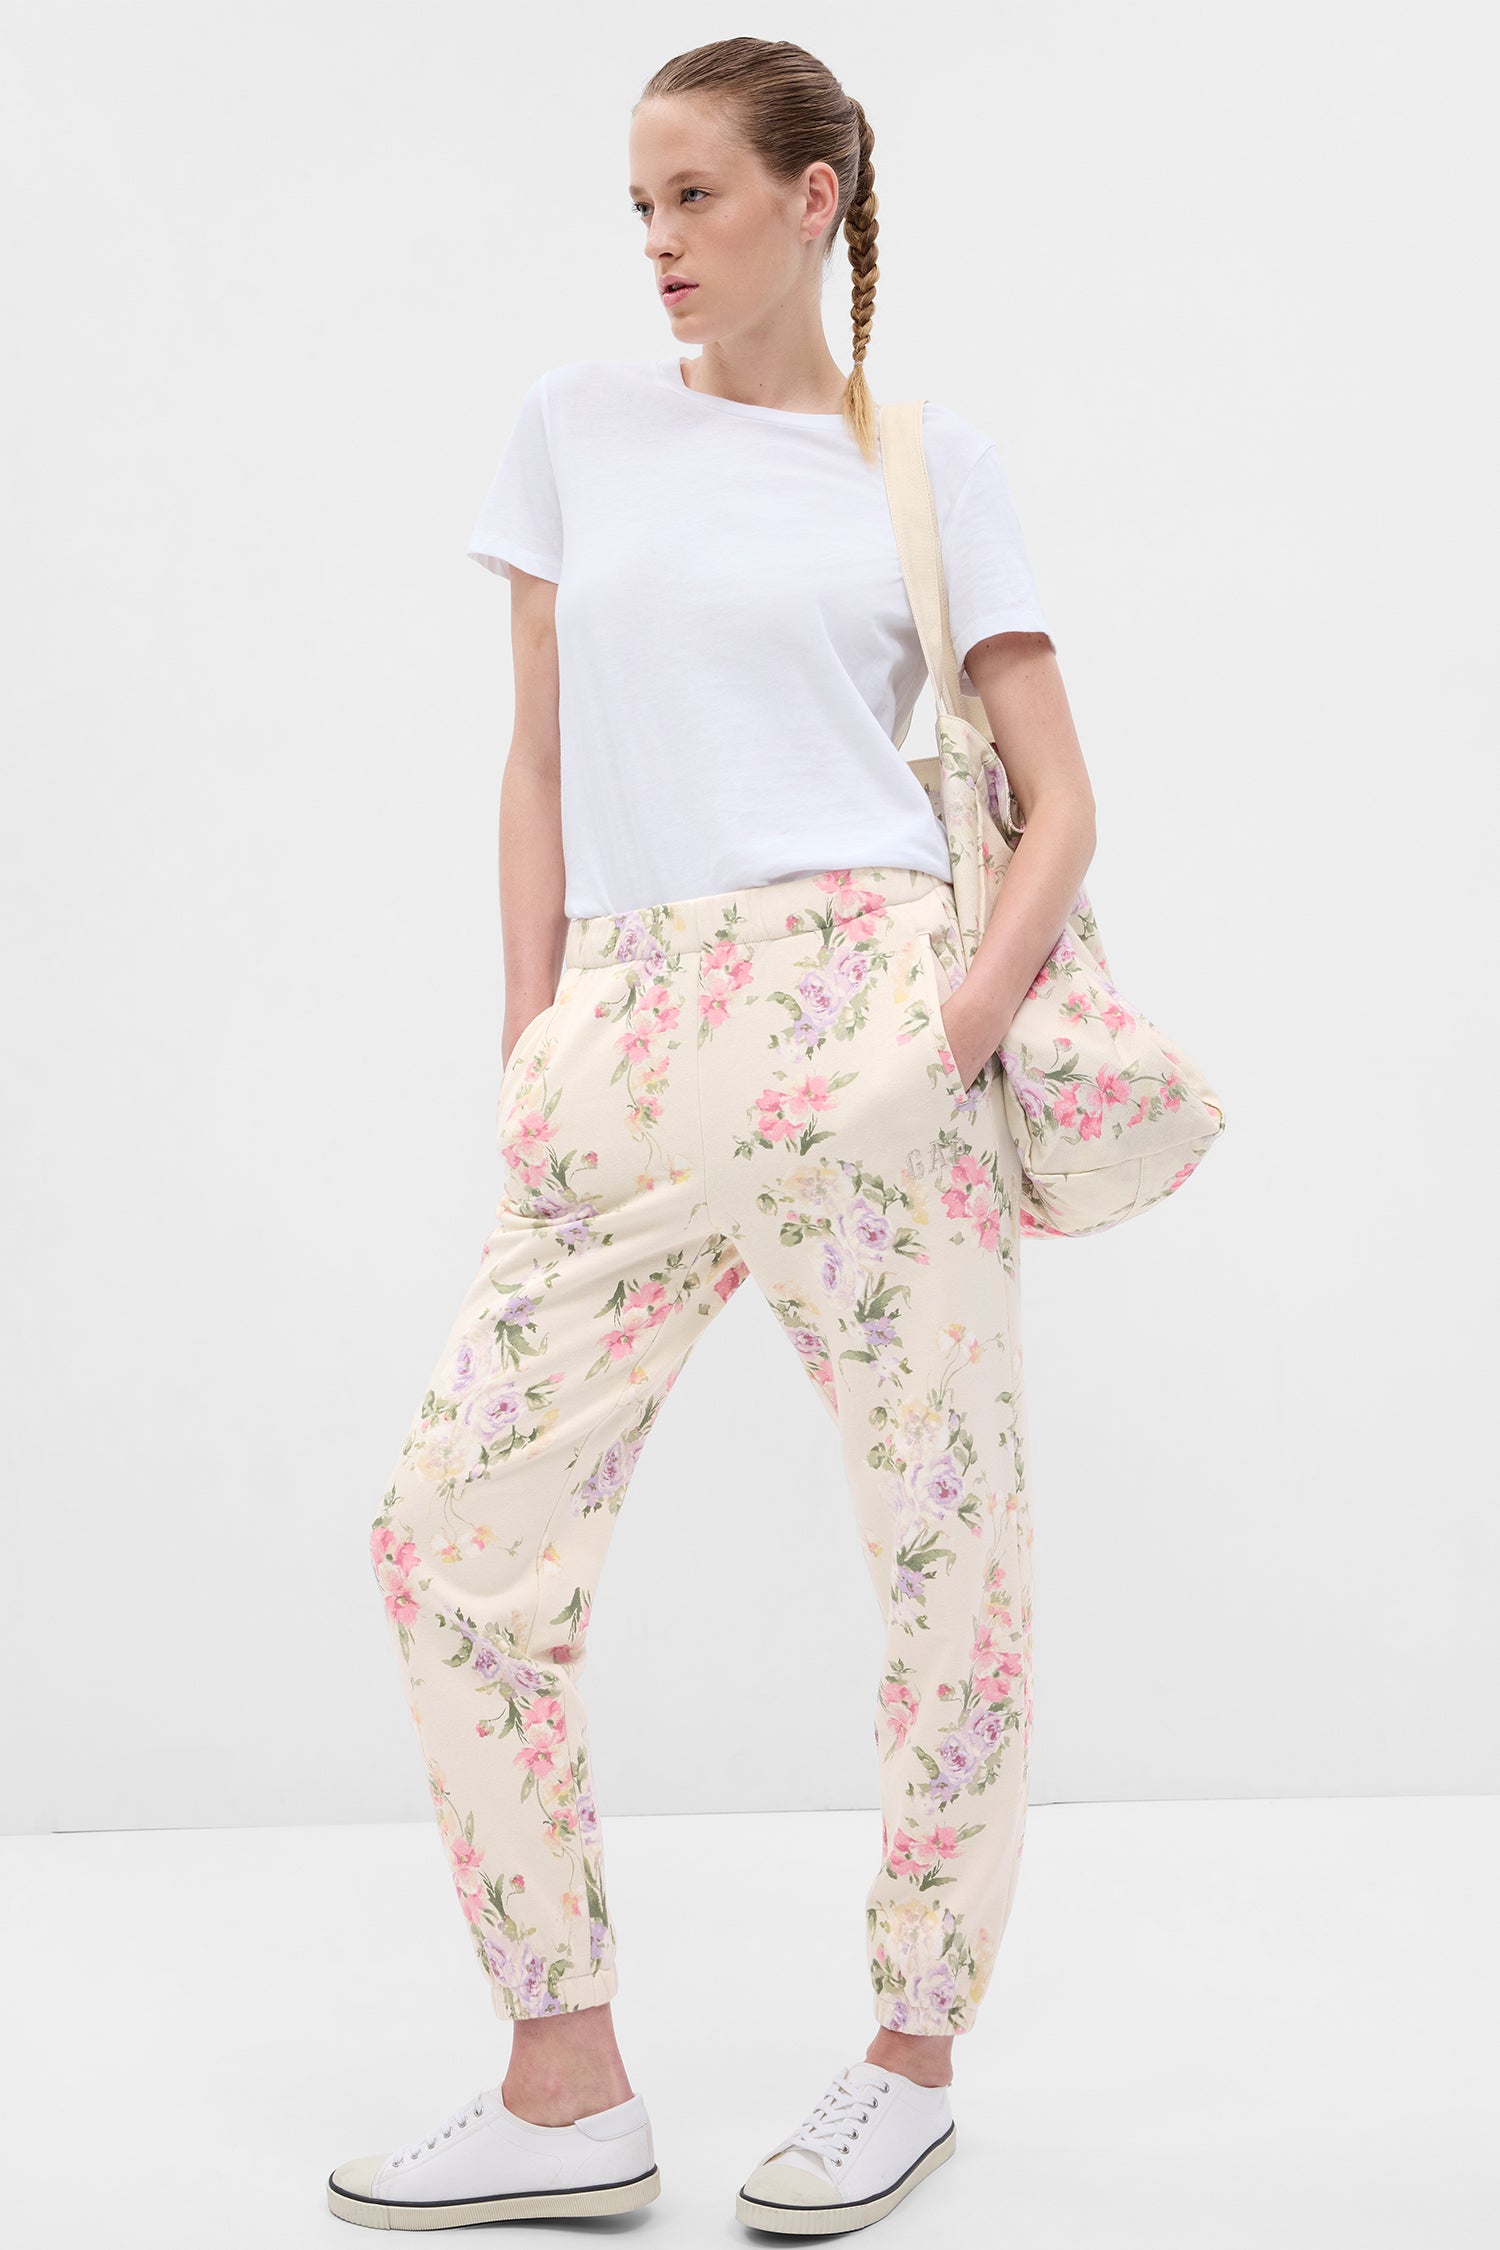 Model wearing cream floral joggers with pink, purple, and green floral print